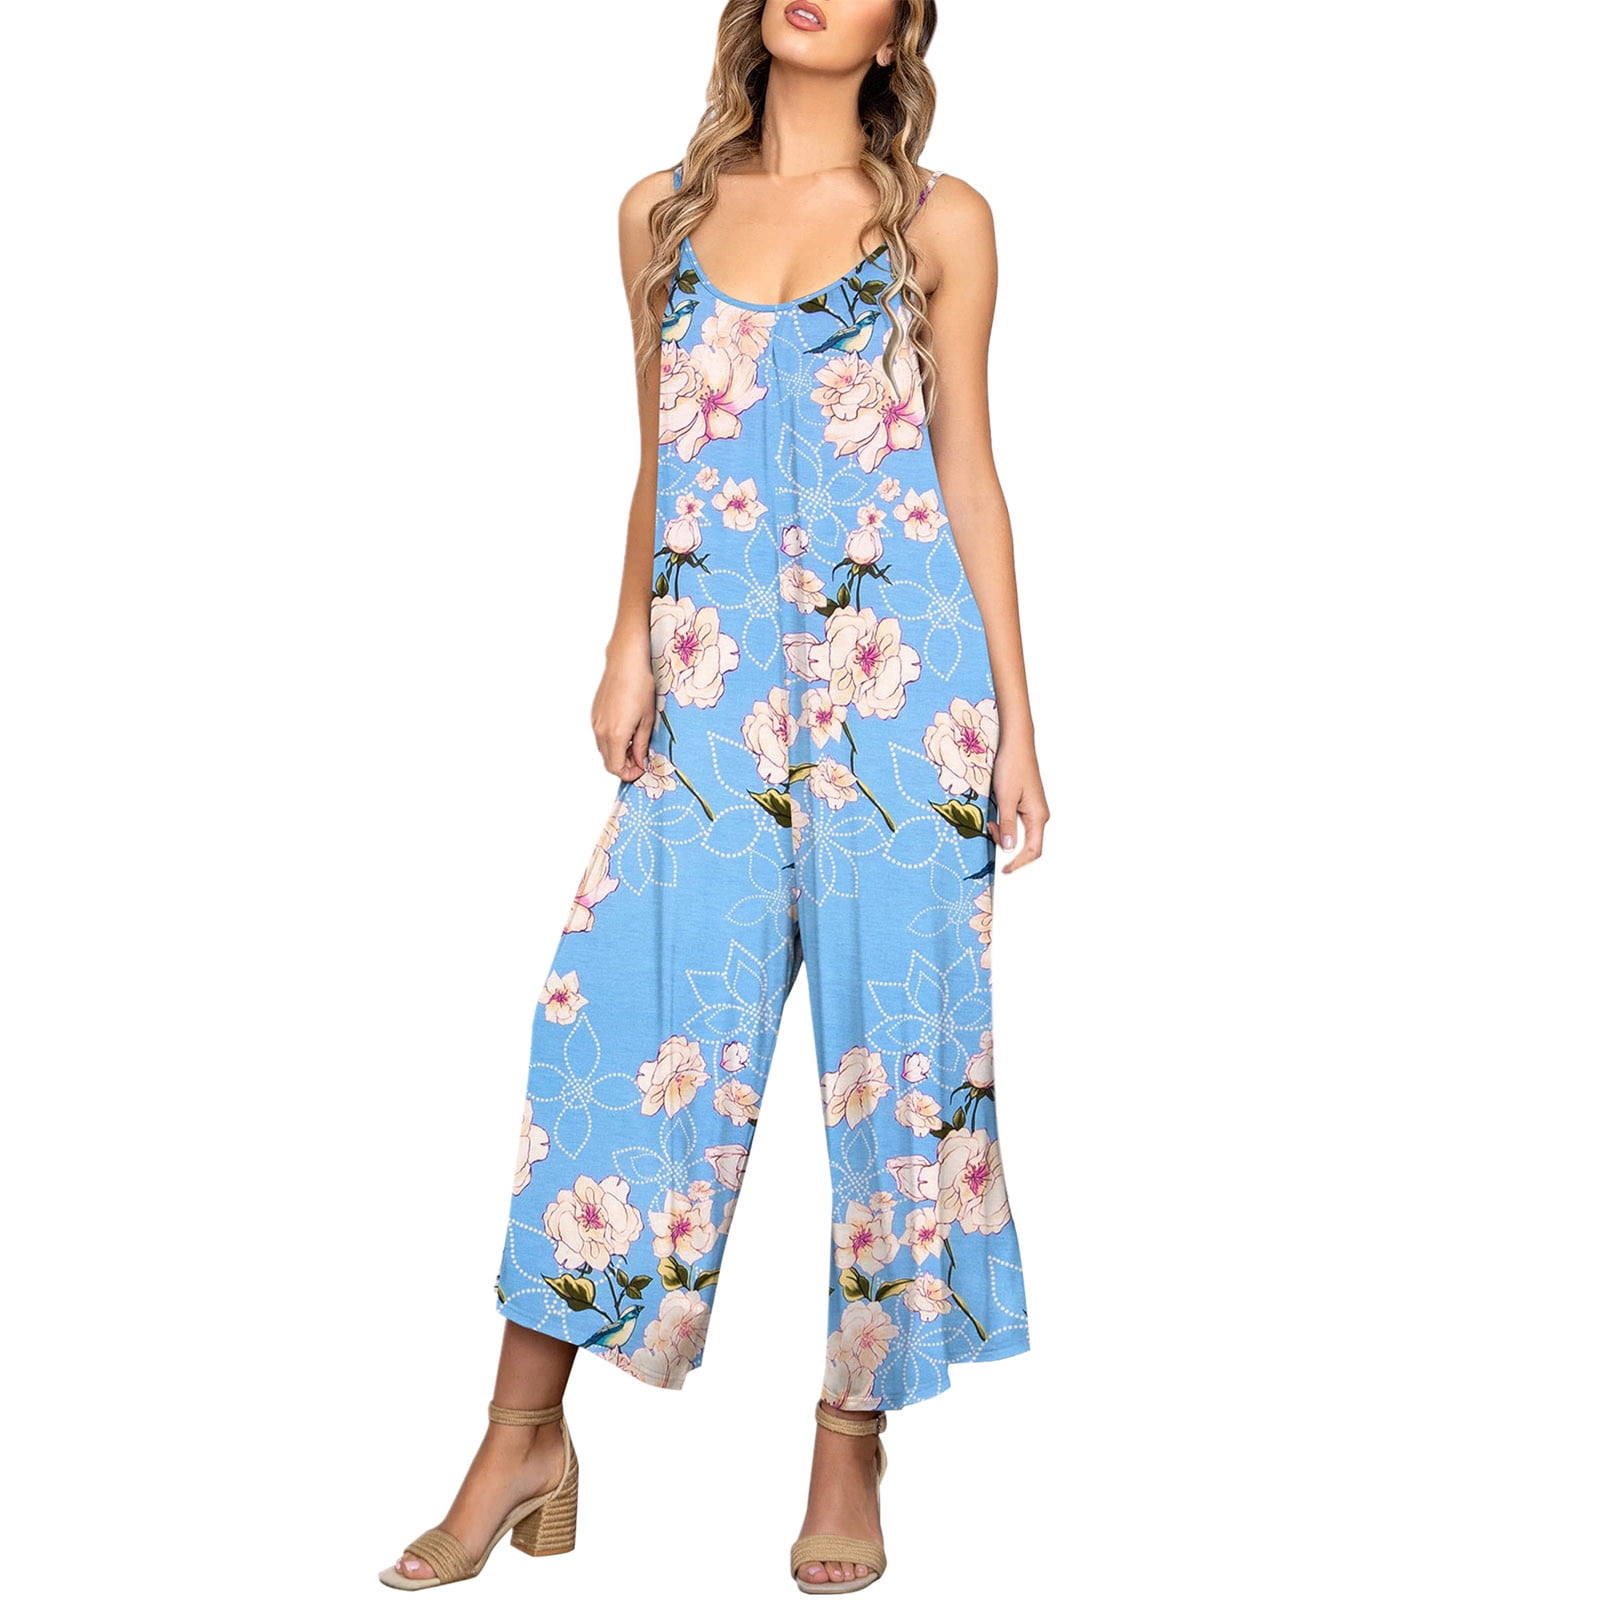 Womens Floral Printed Jumpsuits Casual Sleeveless Spaghetti Strap ...